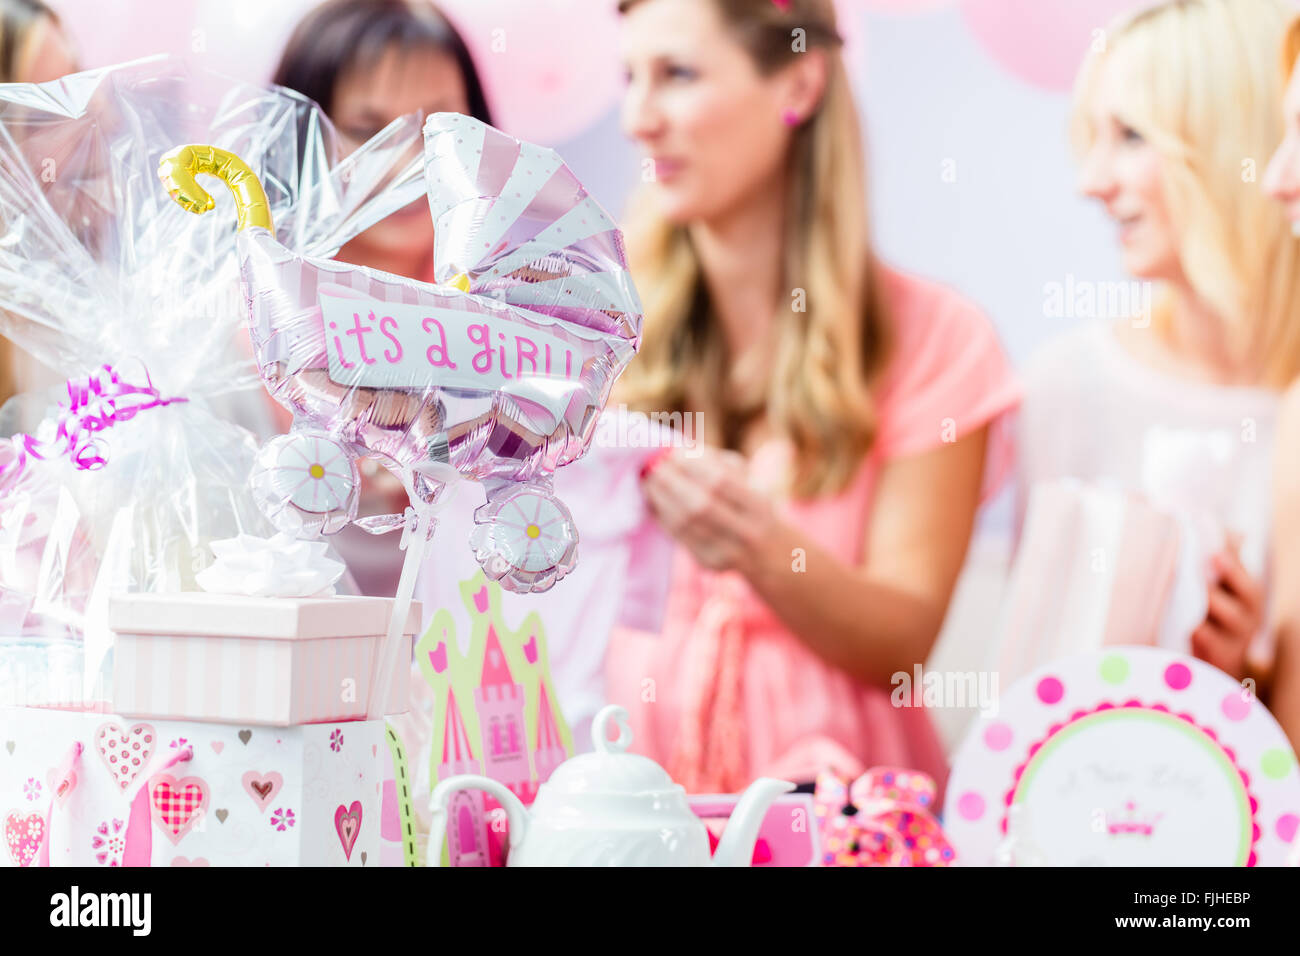 Best Friends on baby shower party celebrating giving kid stuff as present Stock Photo